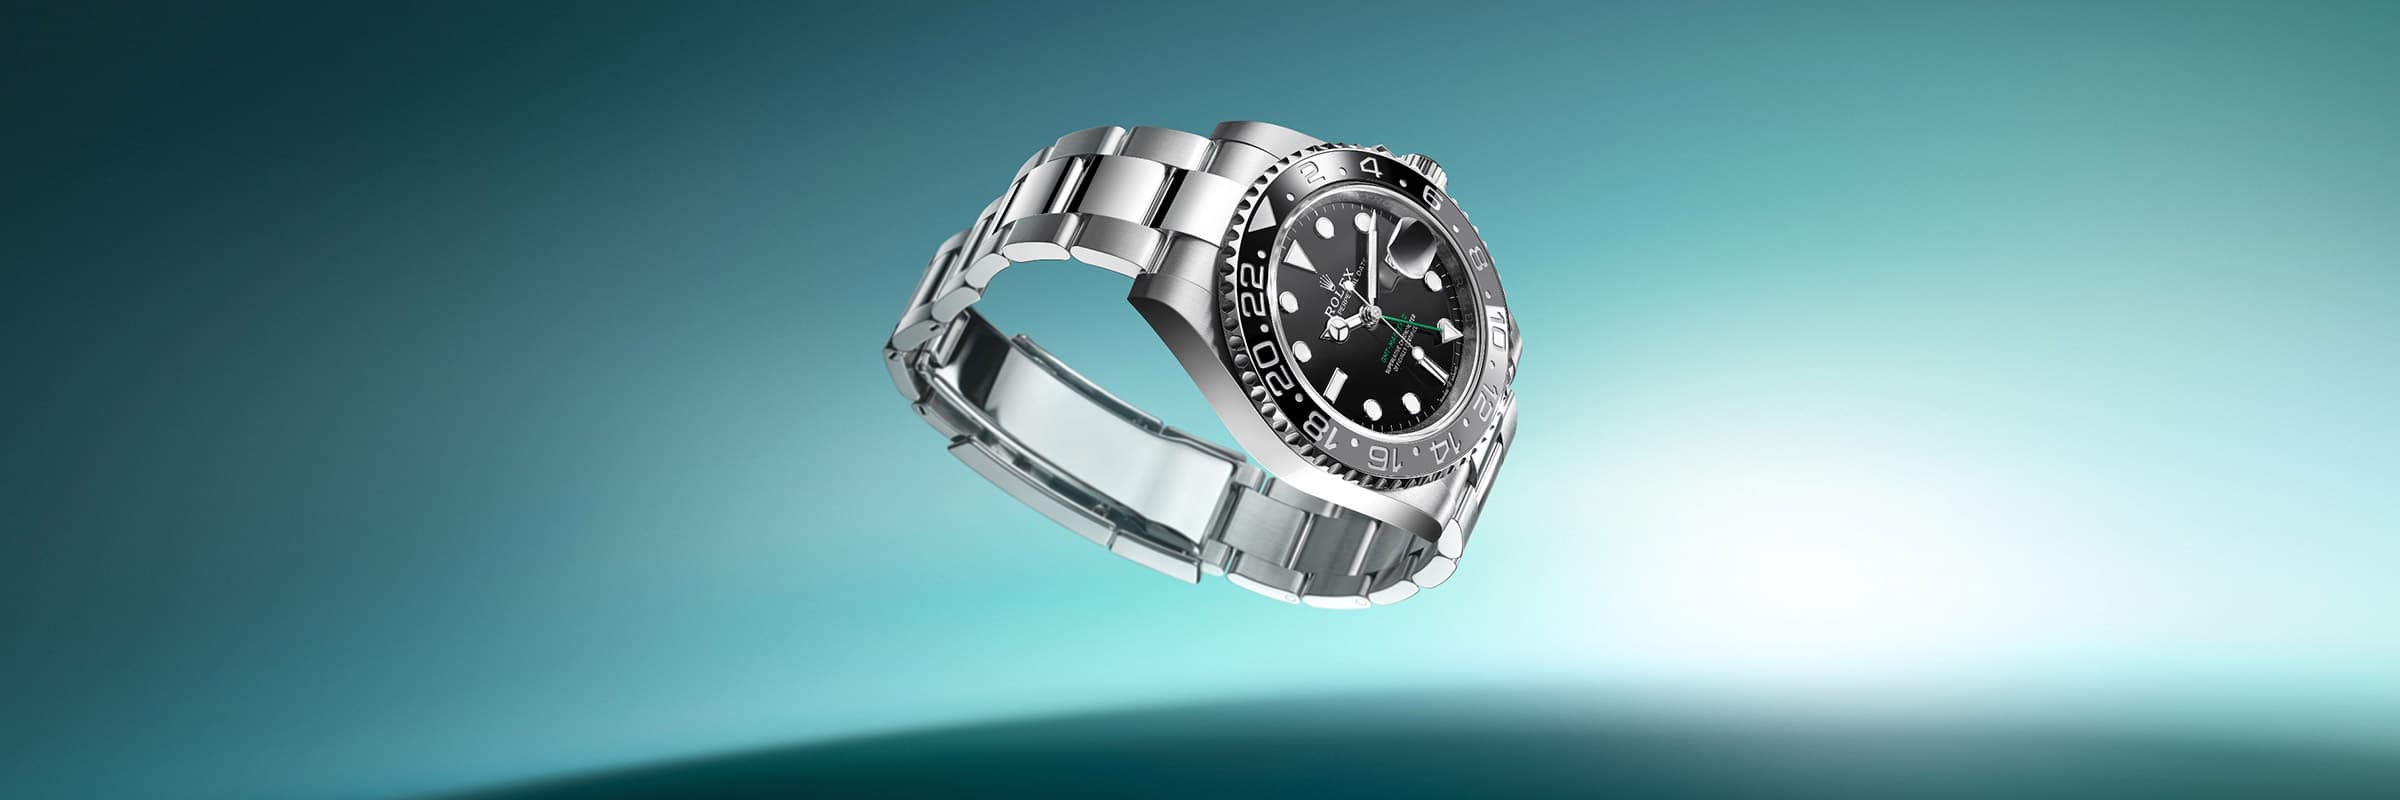 rolex watches 2024 gmt master ii the harmony of contrasts hub main push (1)